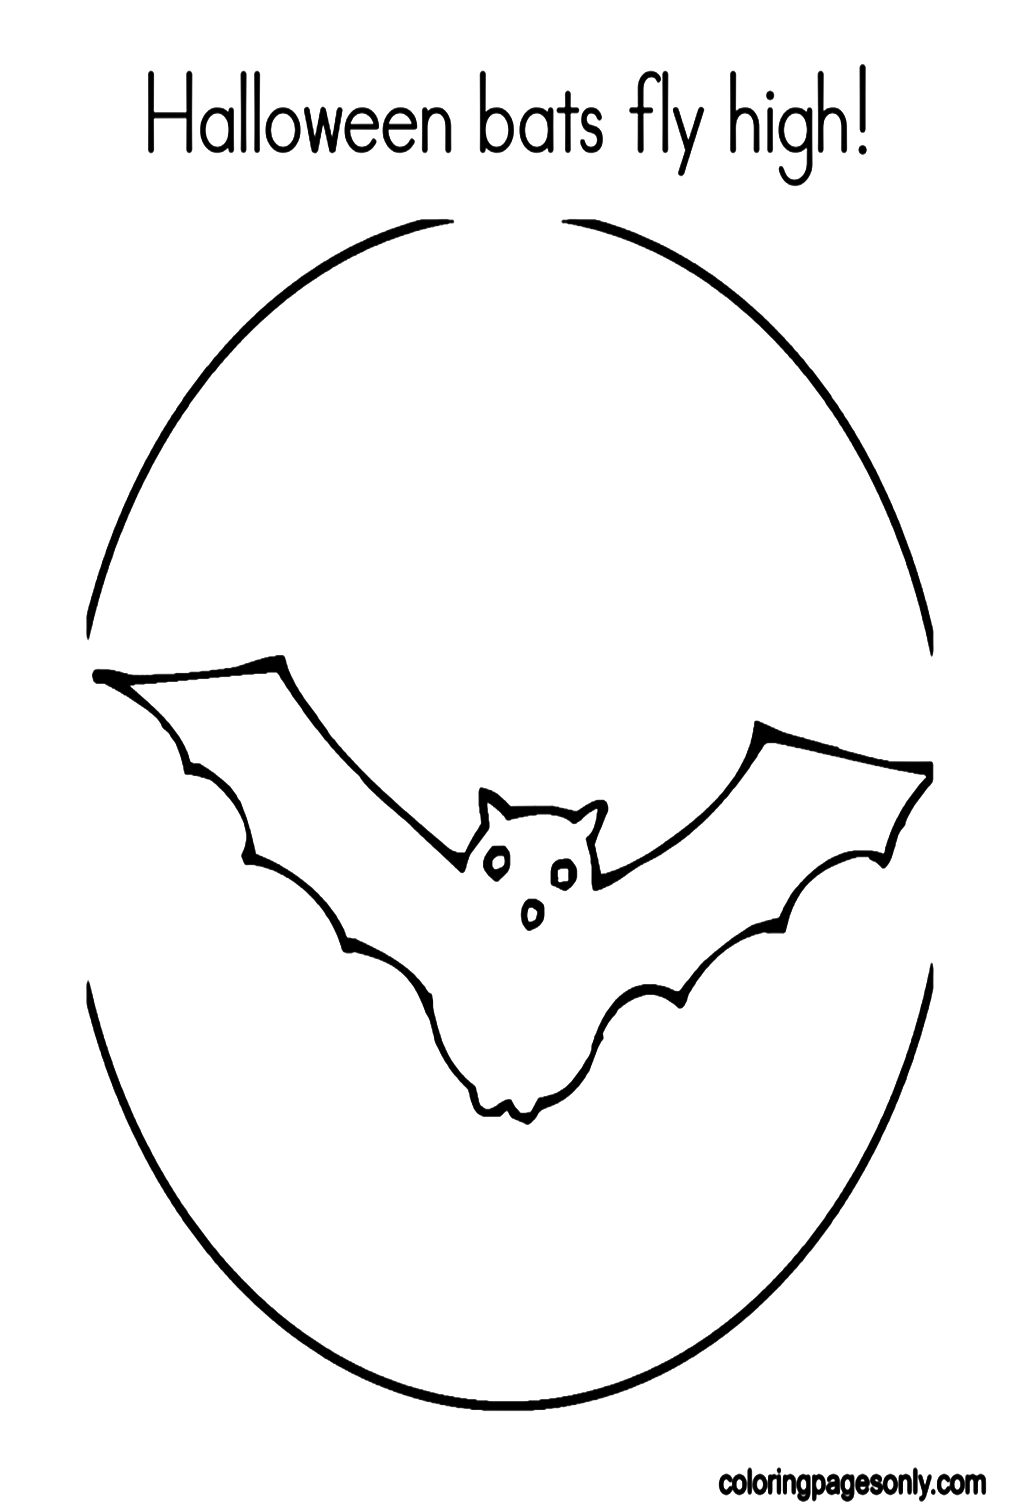 Halloween Bat Fly High Coloring Pages